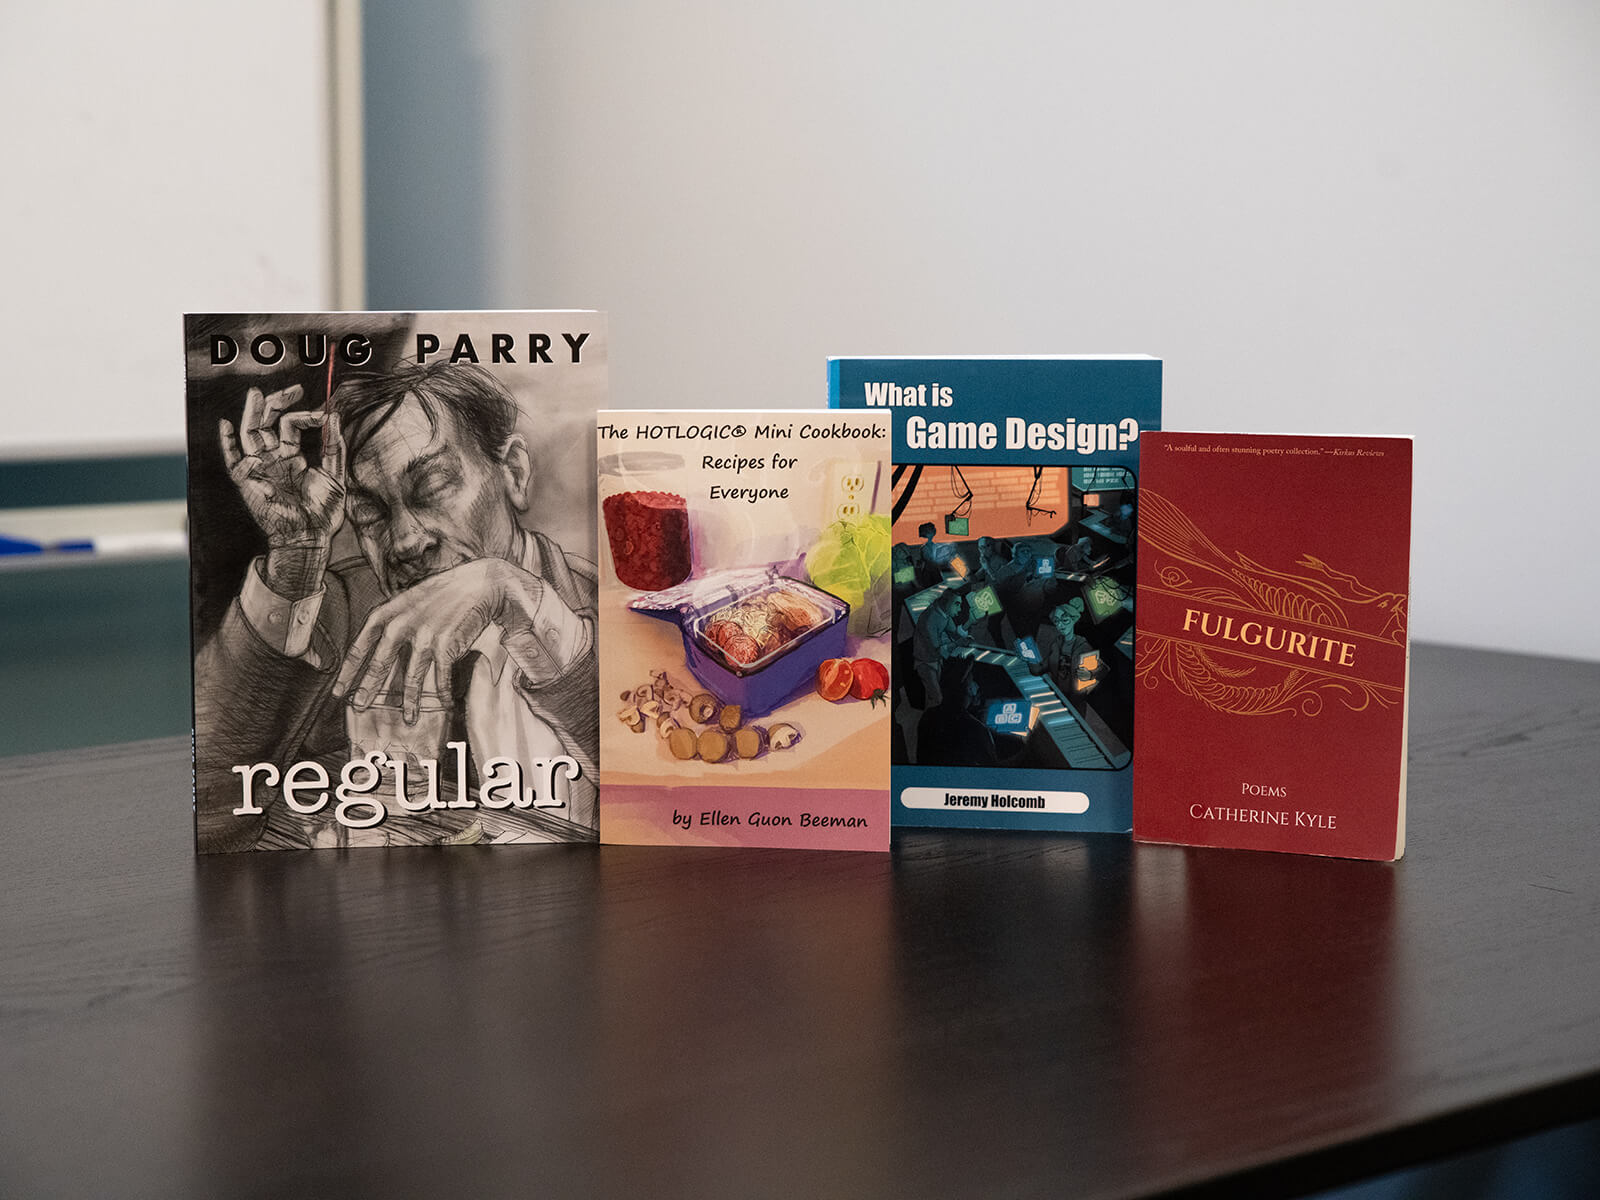 A row of 4 books written by DigiPen faculty.